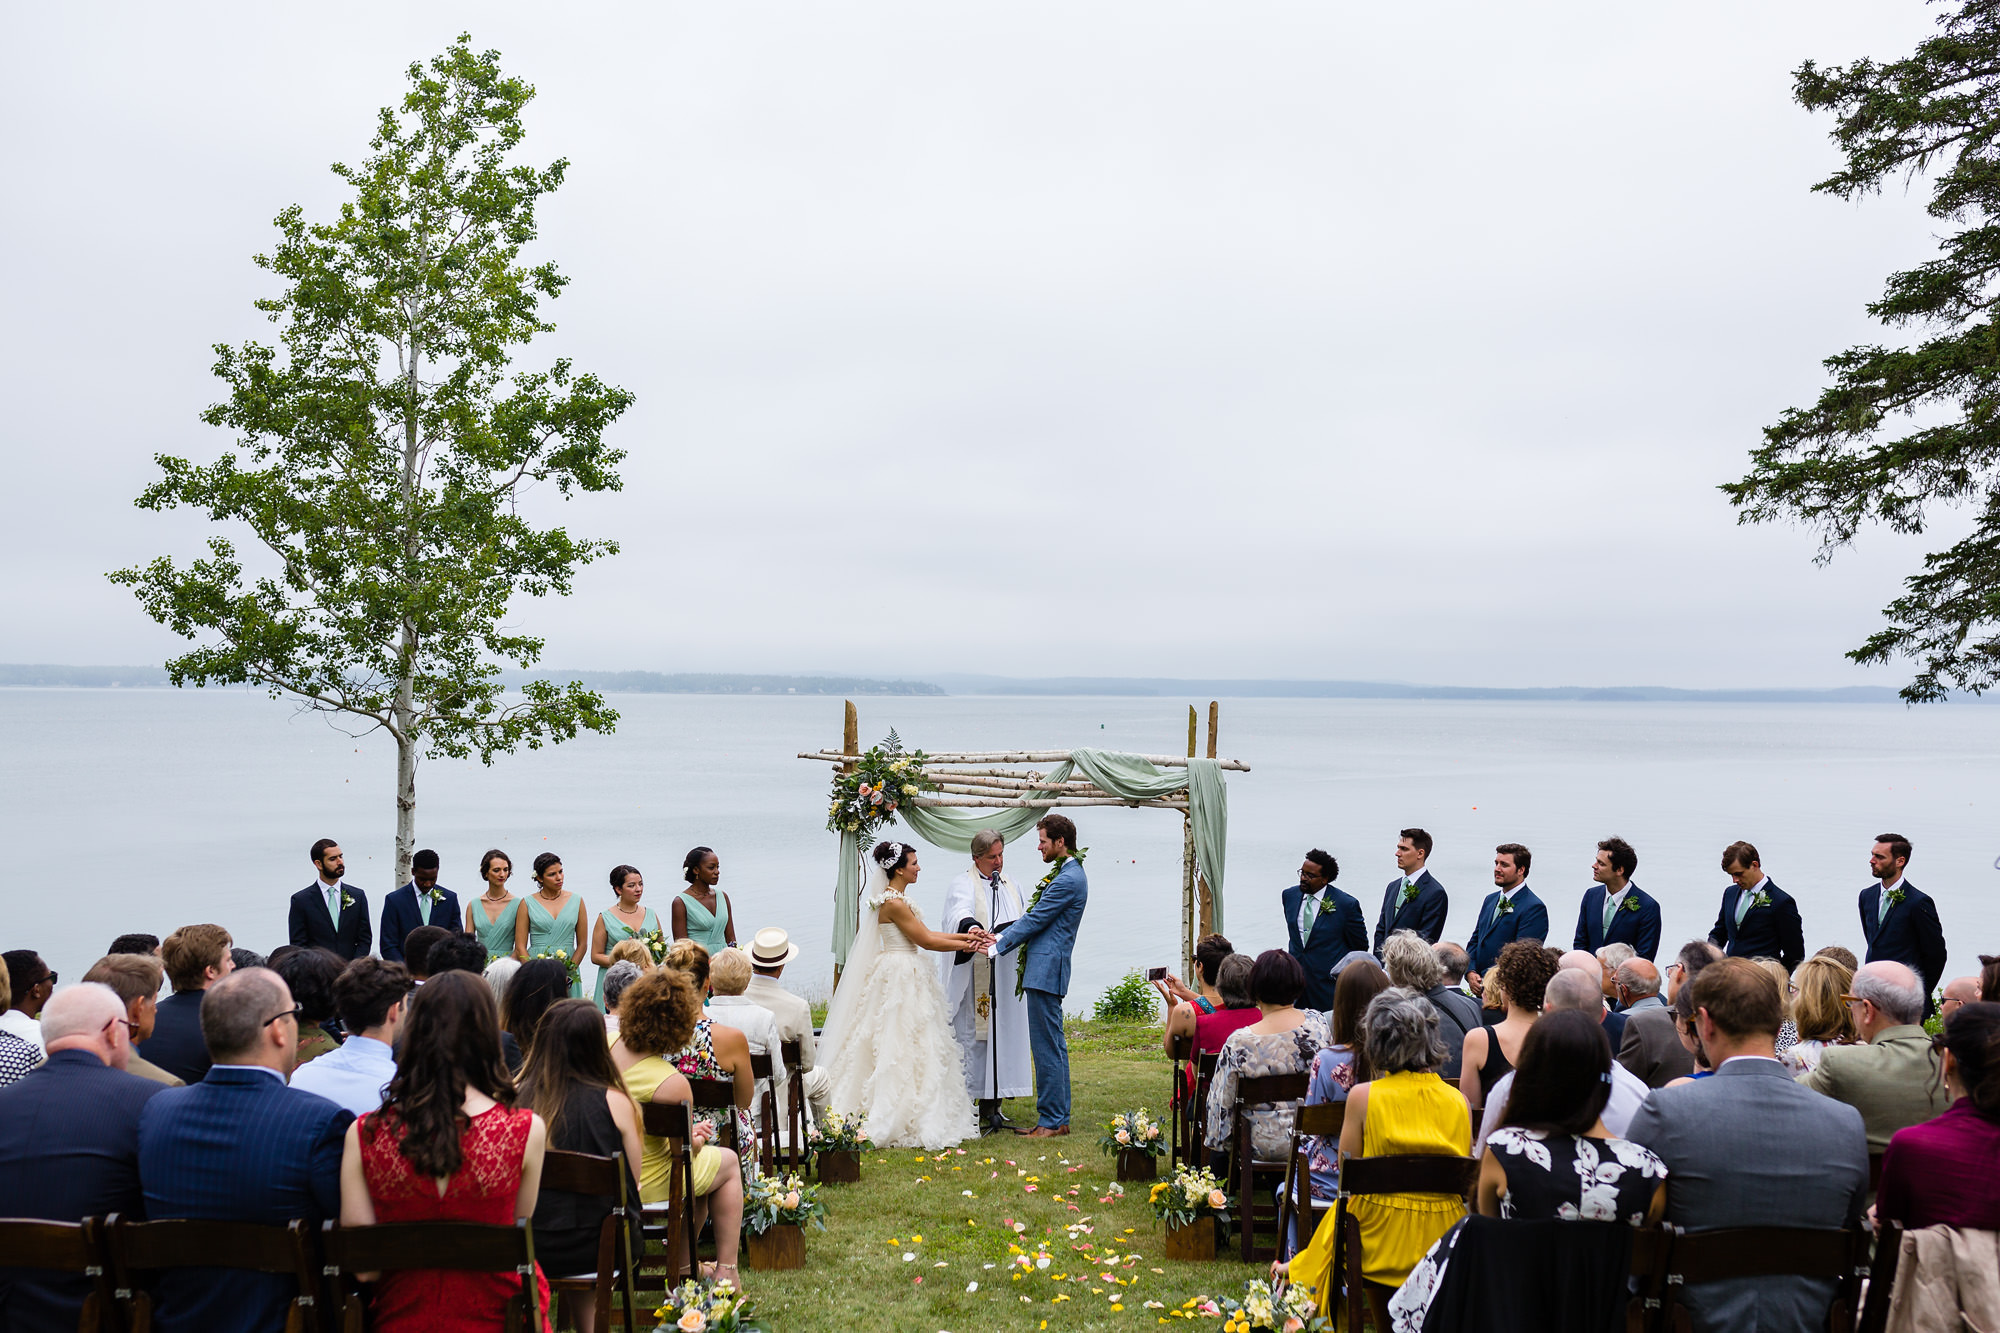 A wedding ceremony at the Pot and Kettle Club in Bar Harbor, Maine